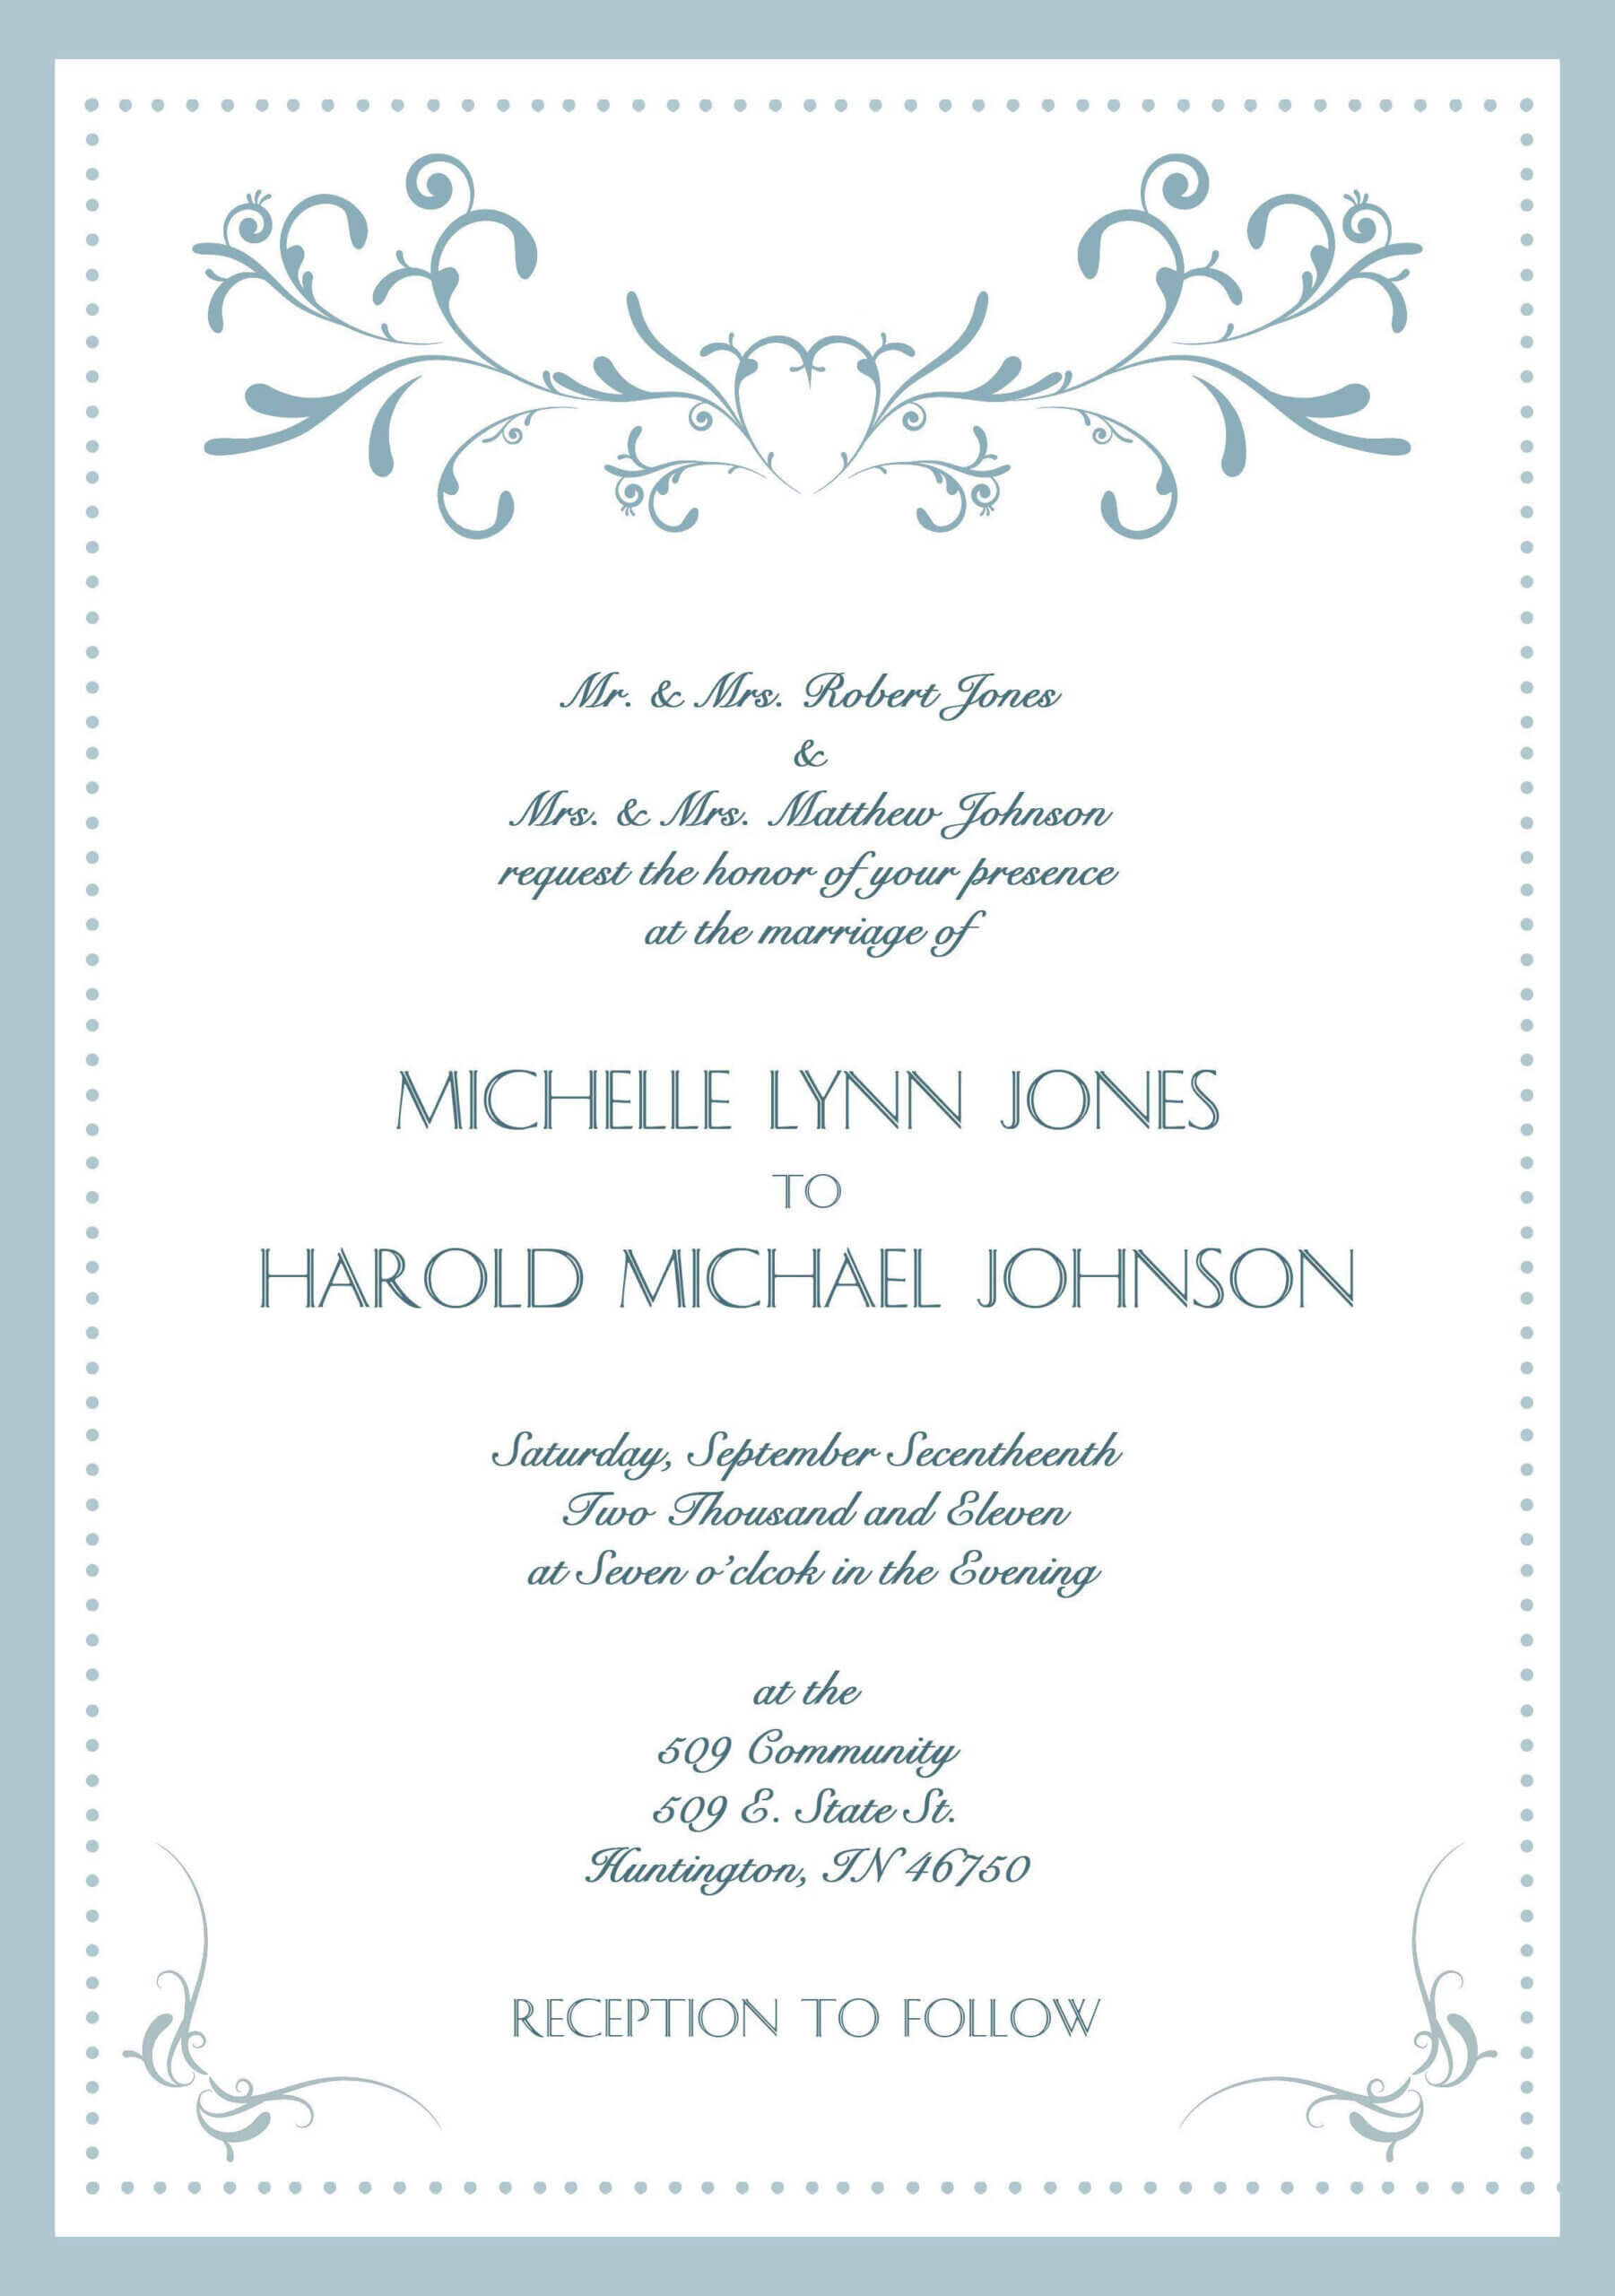 Sample Wedding Invitation Cards In English In 2020 | Wedding Within Sample Wedding Invitation Cards Templates